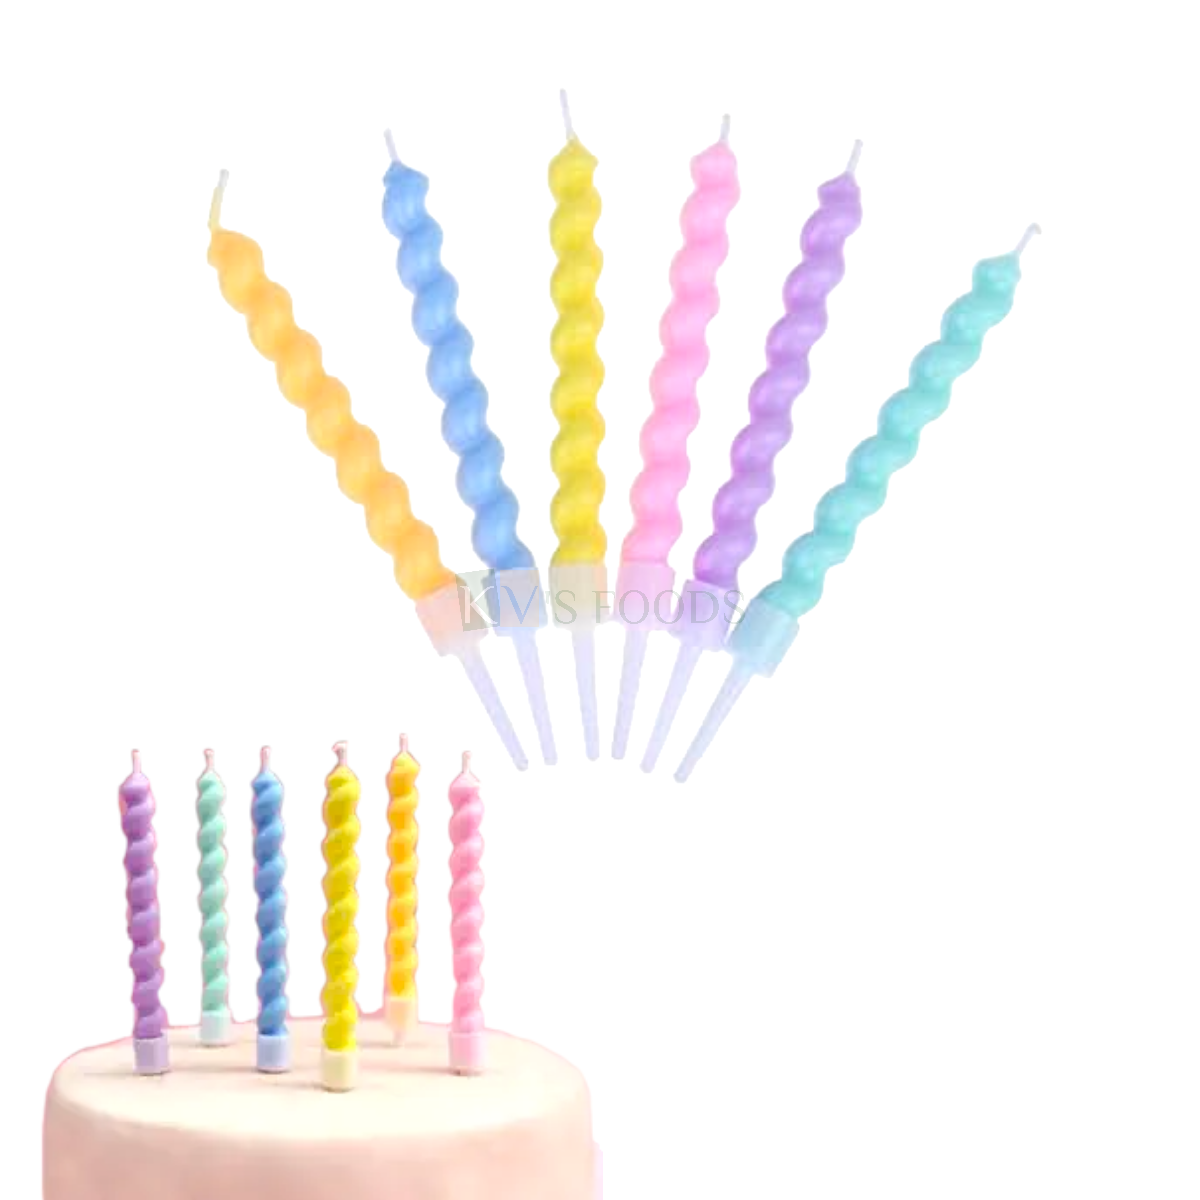 6PCS Pastel Rainbow Colour Spiral Twisty Wax Candles Set with Holders Cake Topper, Kids Girls Happy Birthday Pillar Candles Insert Curly Coil Candles Wedding Bridal Baby Shower DIY Cupcake Decorations